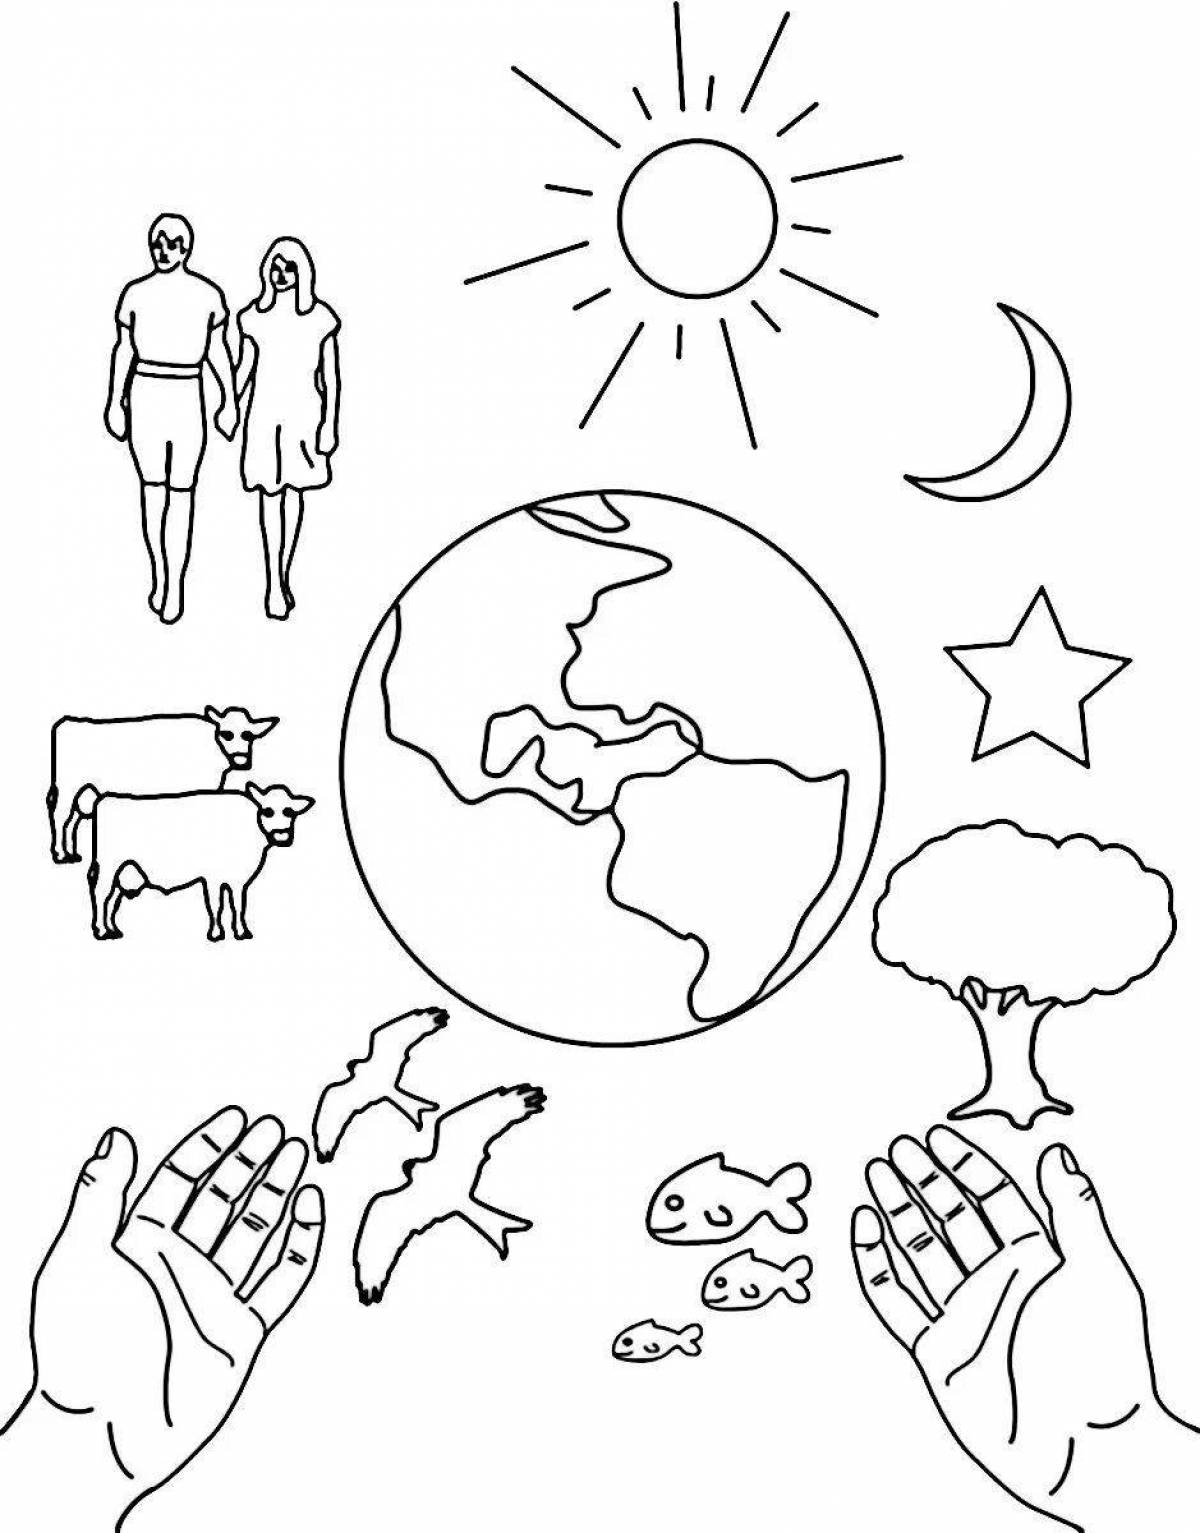 Coloring book charming world on earth